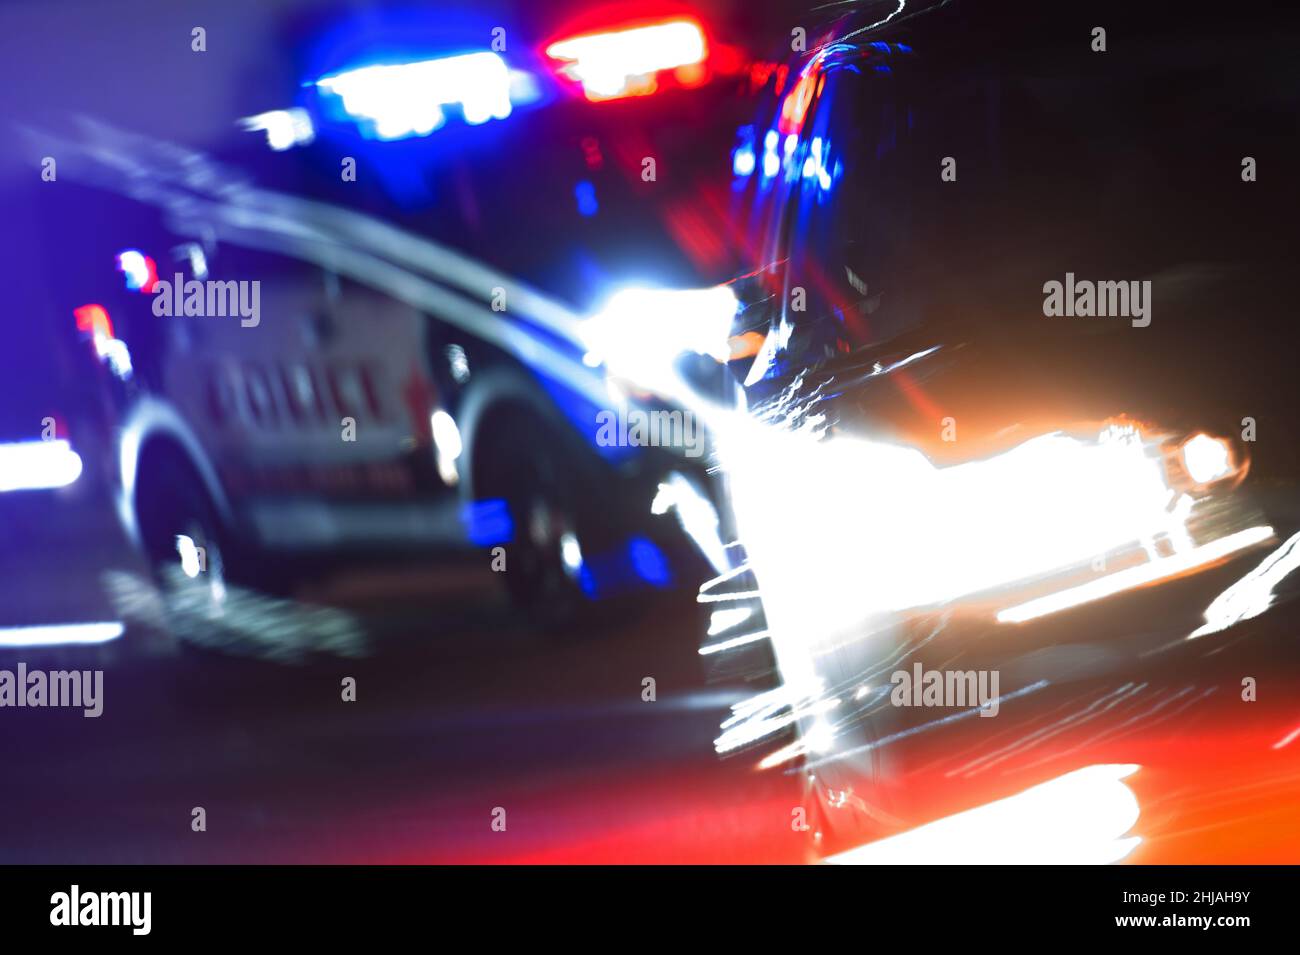 Hot Pursuit Police Traffic Chase at Night. Police Cruiser Next to Running Out DUI Driver Conceptual Photo with Motion Blurs. Police Enforcement Theme. Stock Photo